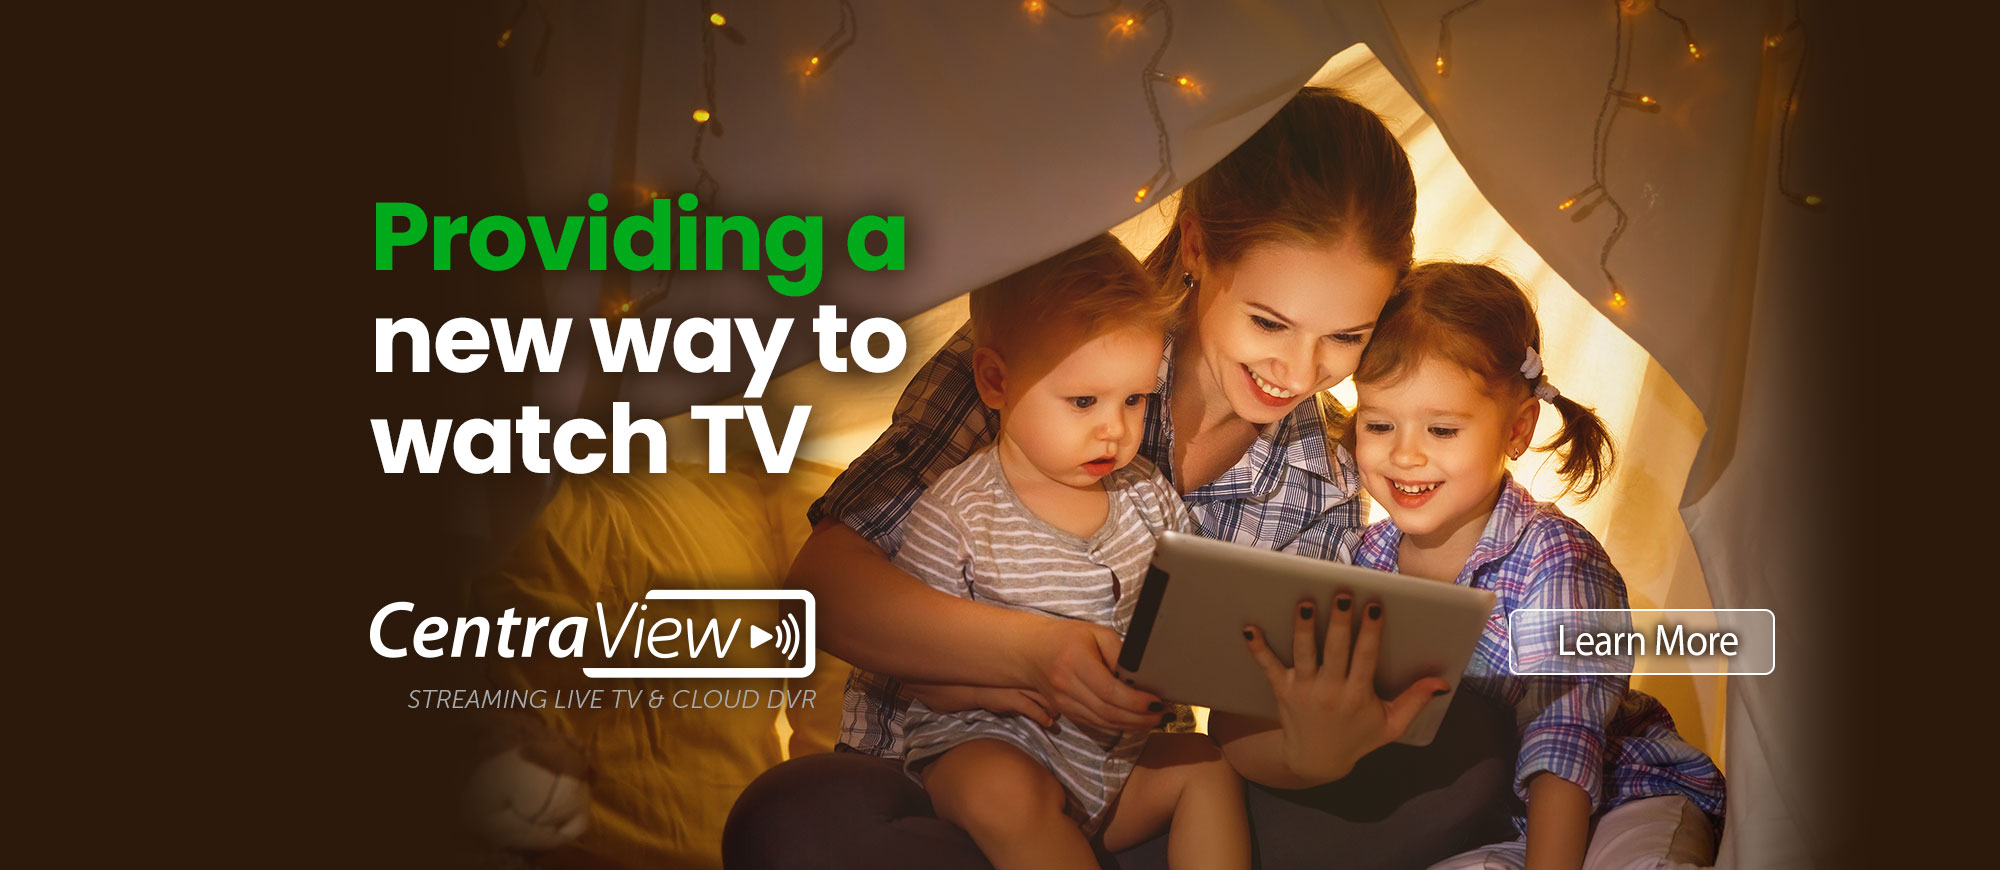 CentraView - A new way to watch TV